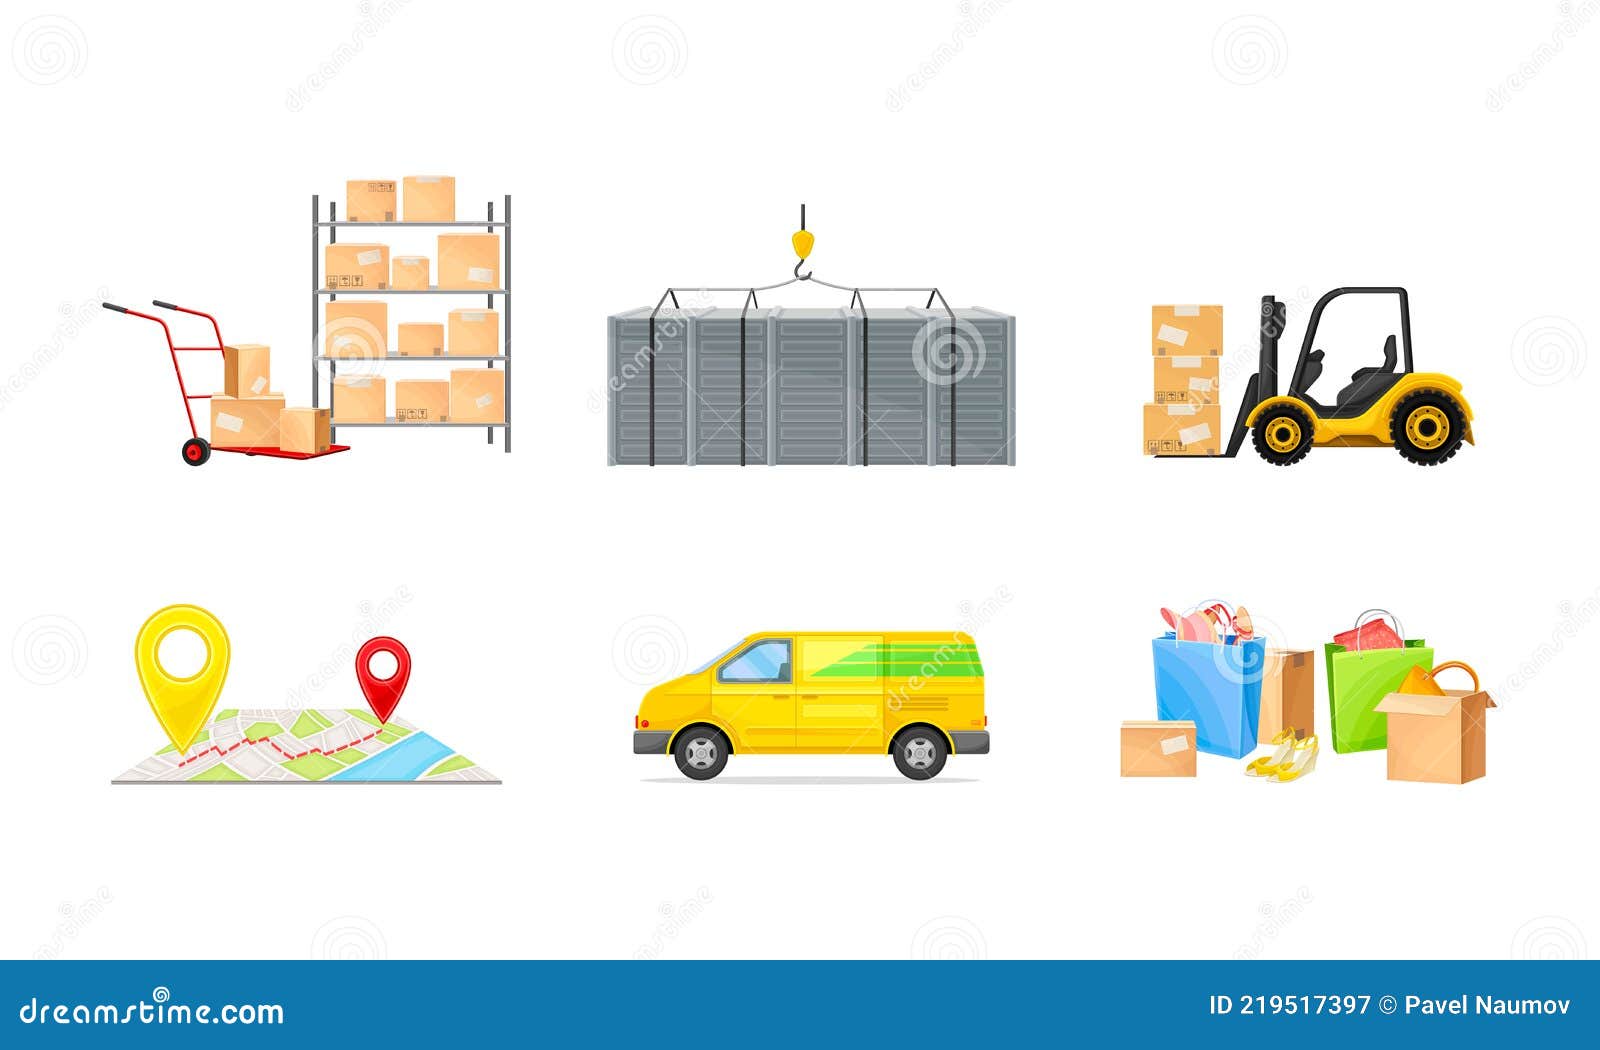 Shopping Logistics from Order Batching, Transportation and Delivery ...